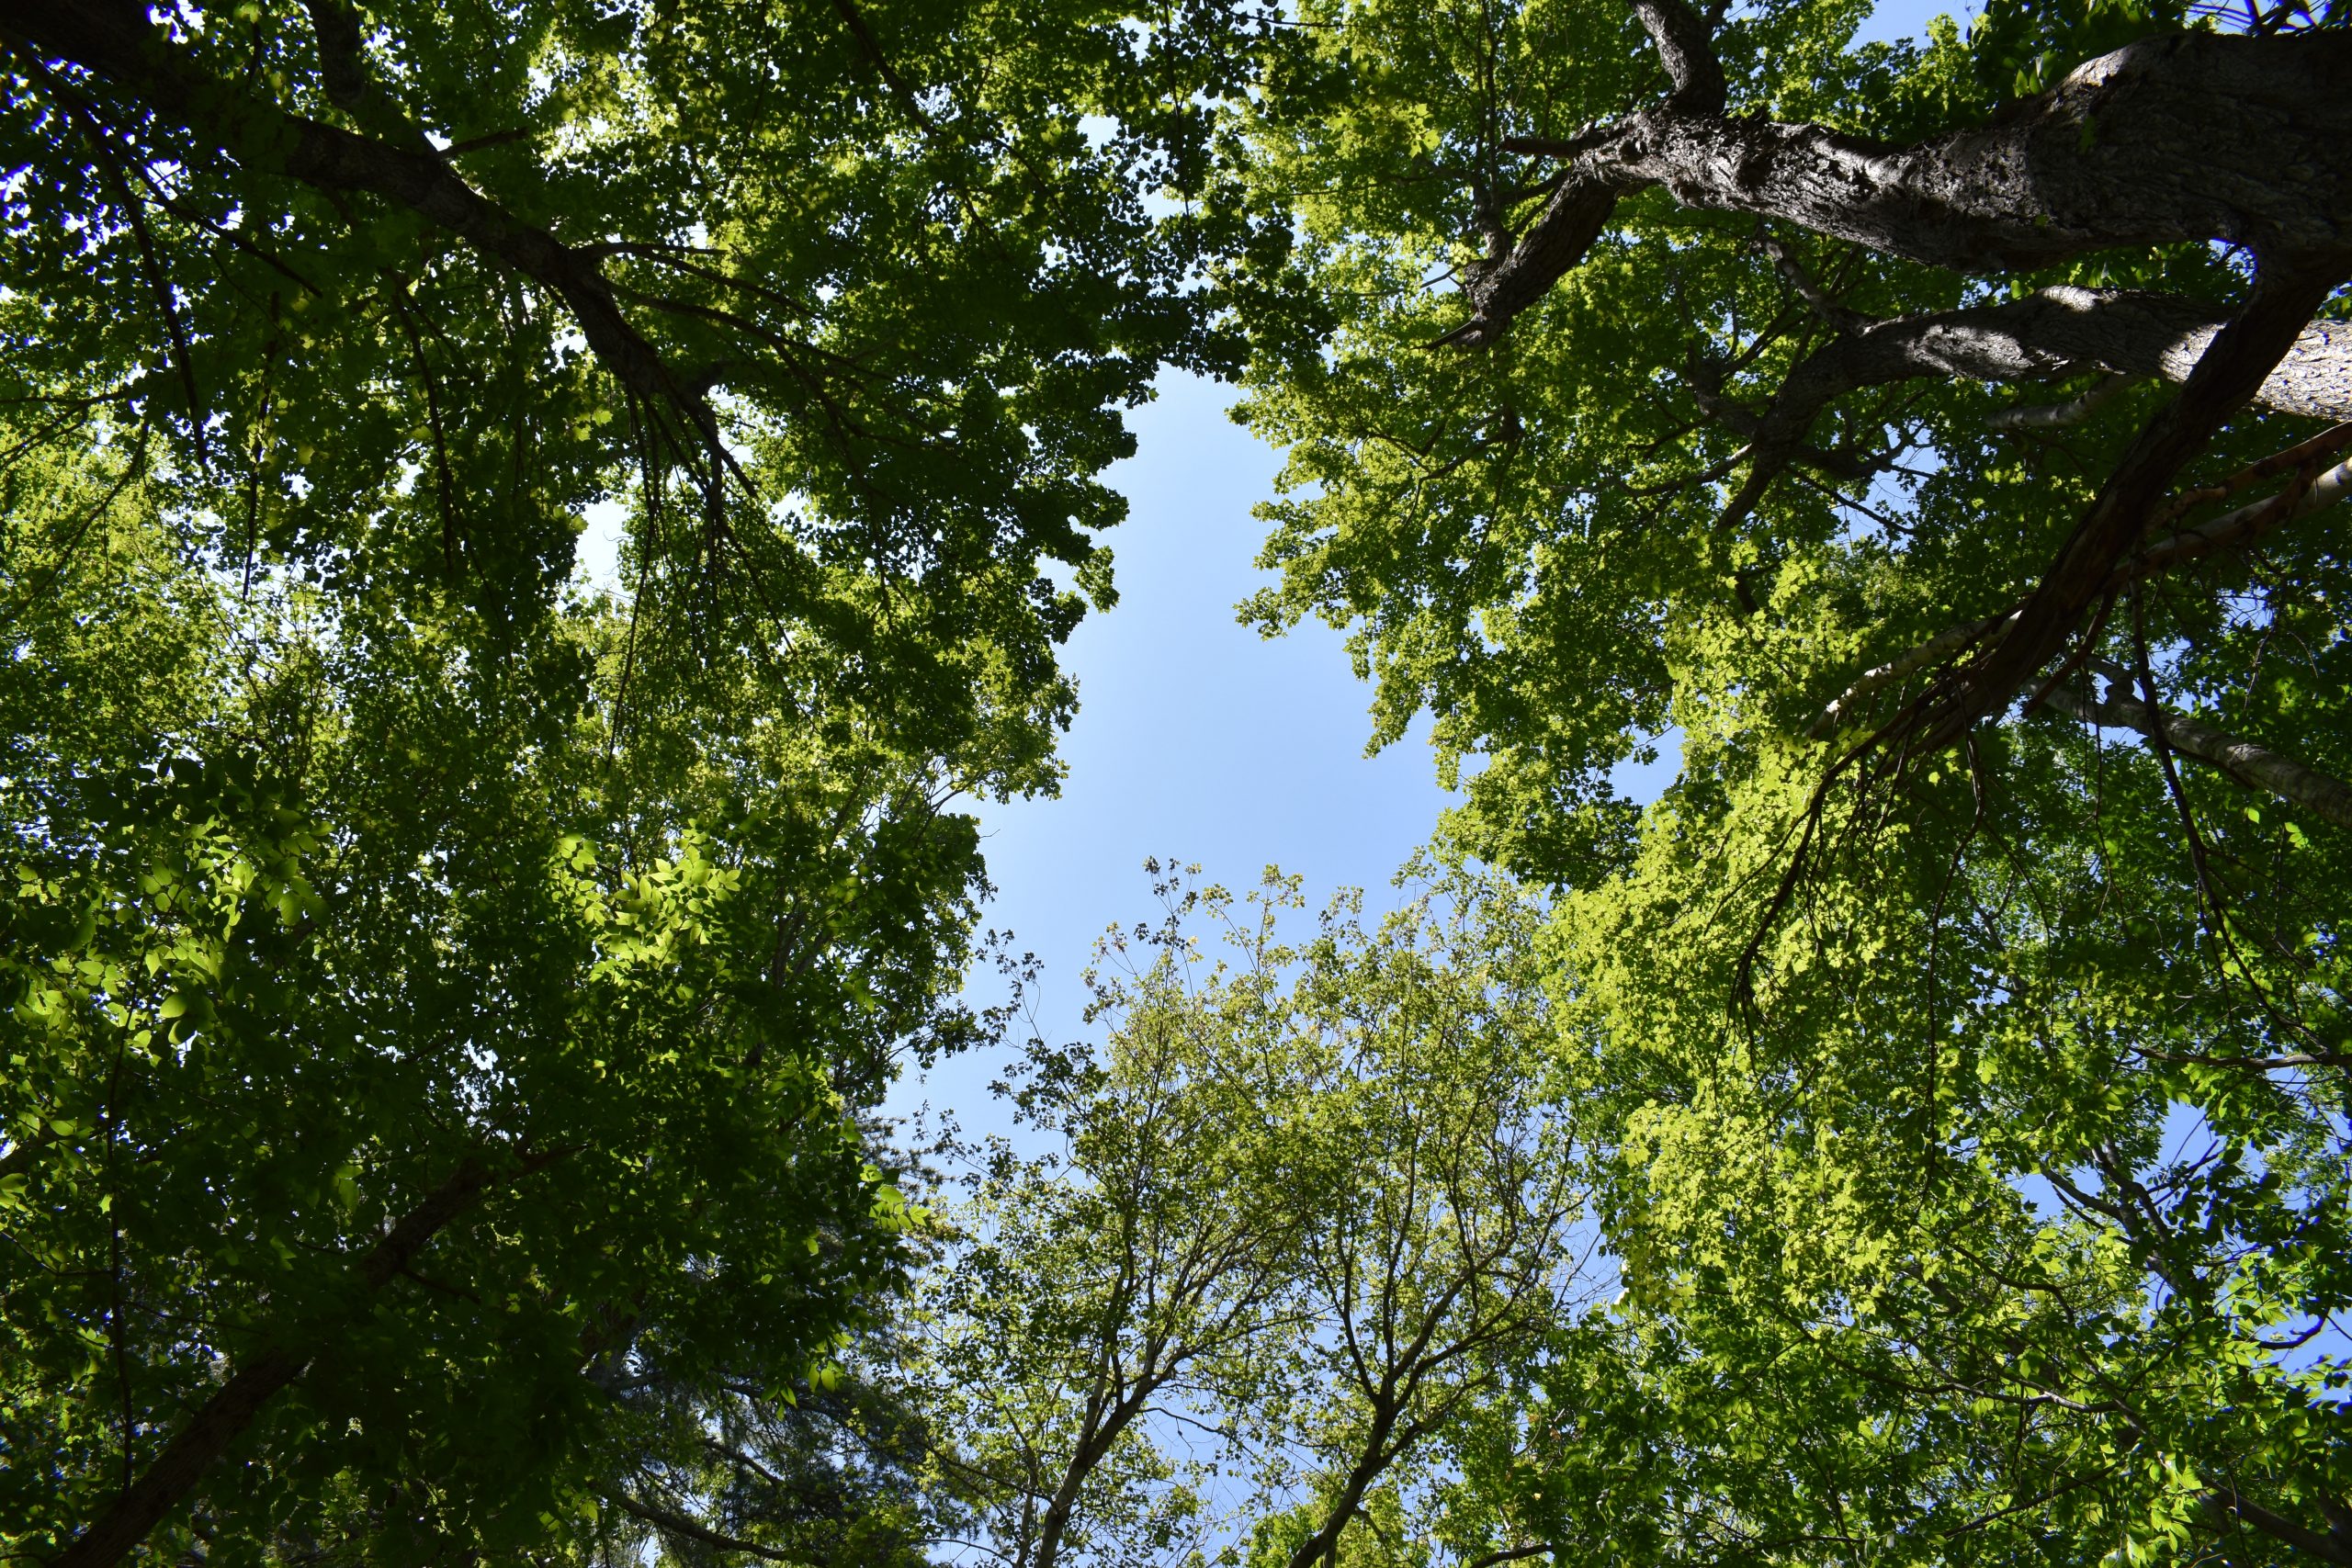 Looking up at the sky through trees.